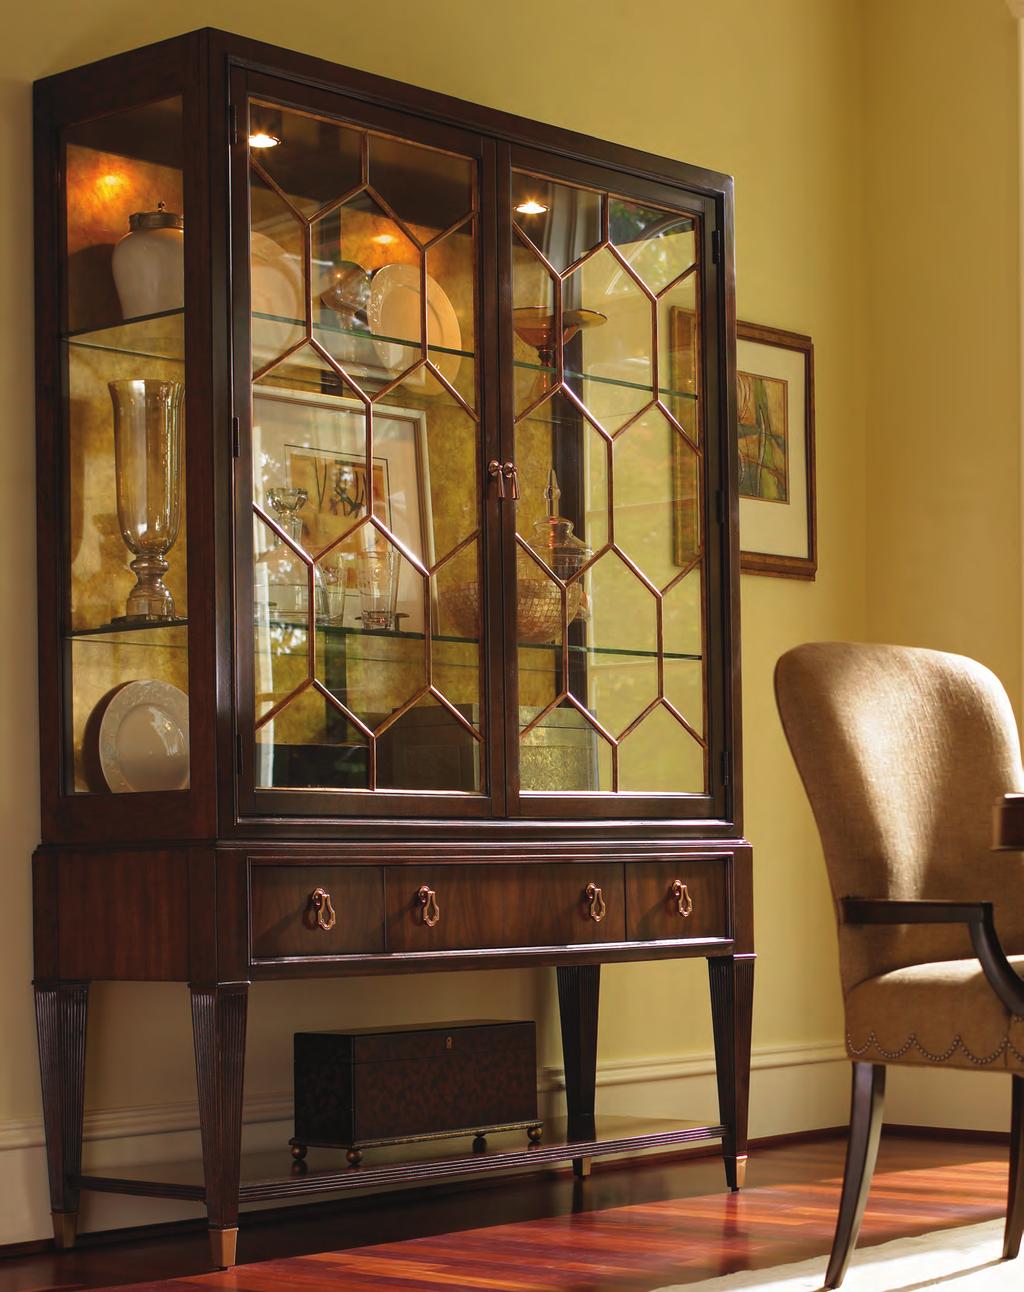 The Belfort China is an elegant design statement, with burnished gold